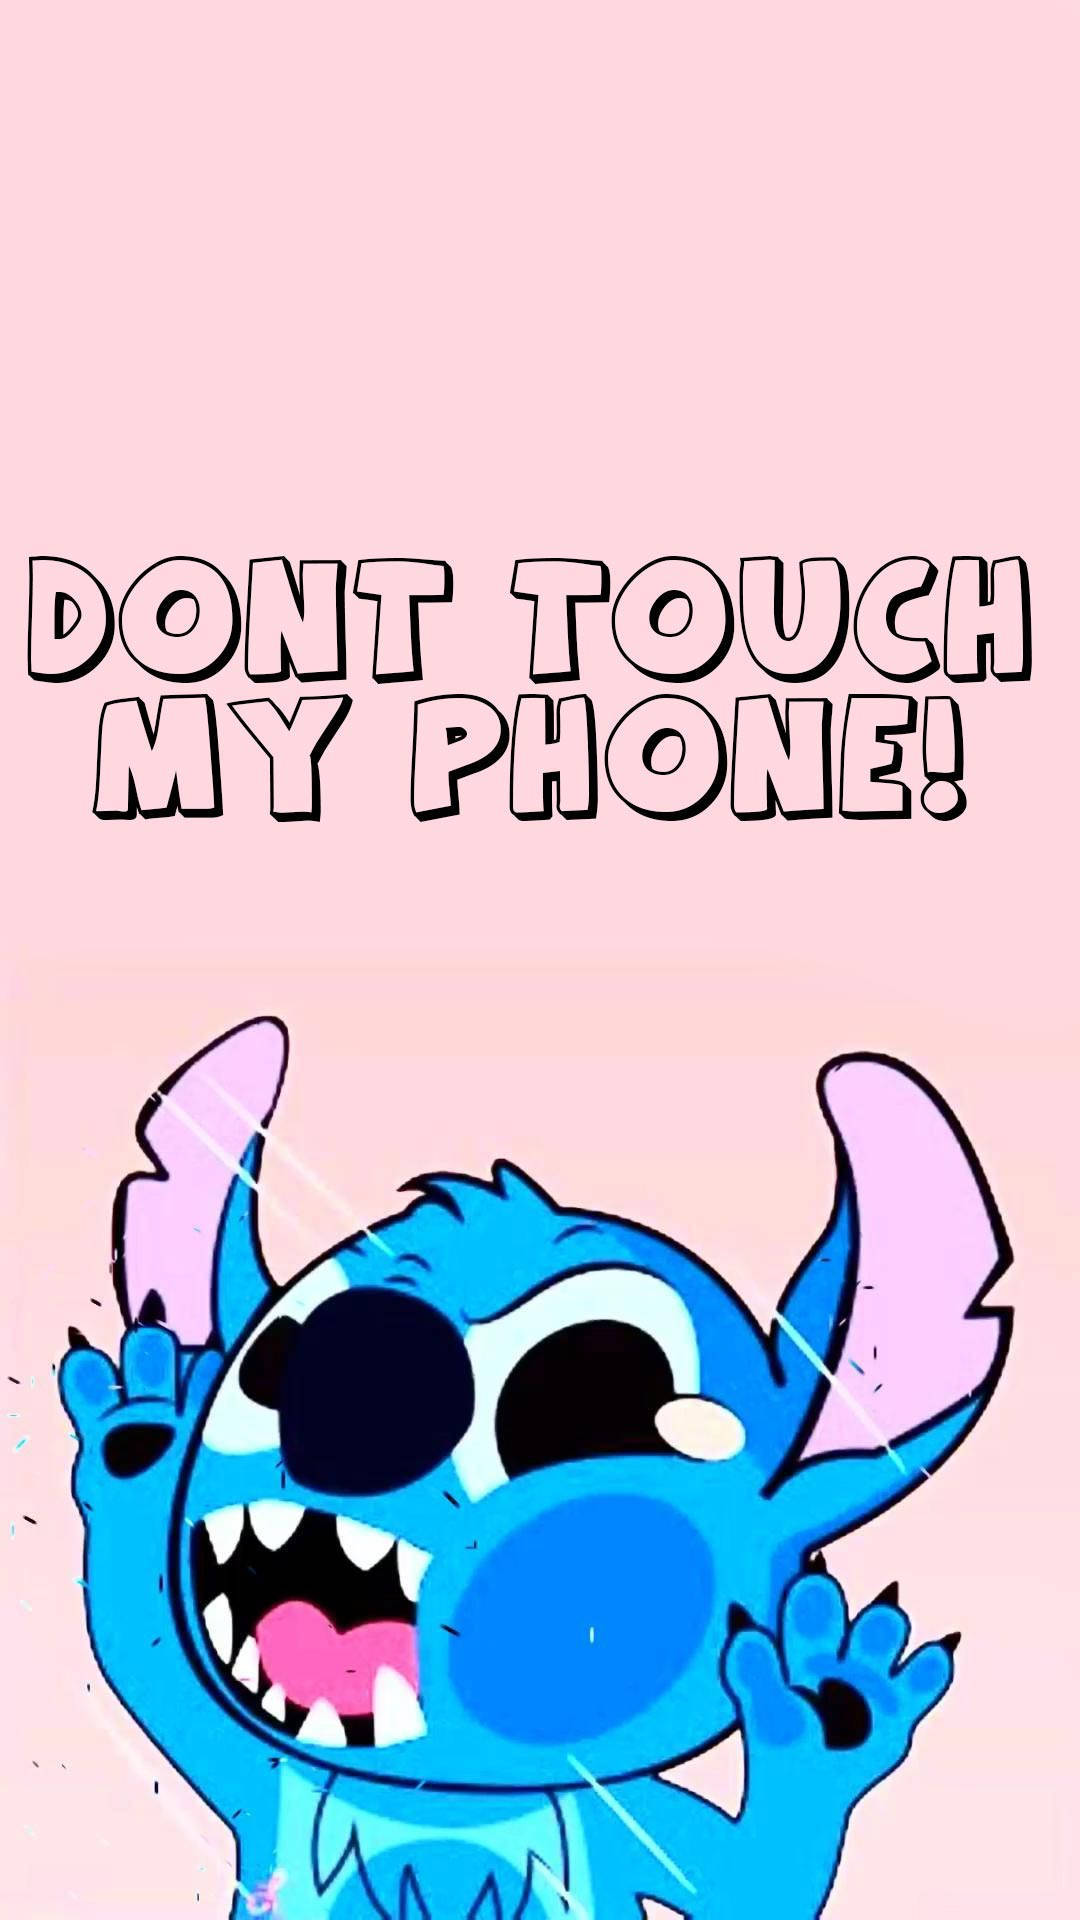 100+] Pink Stitch Wallpapers